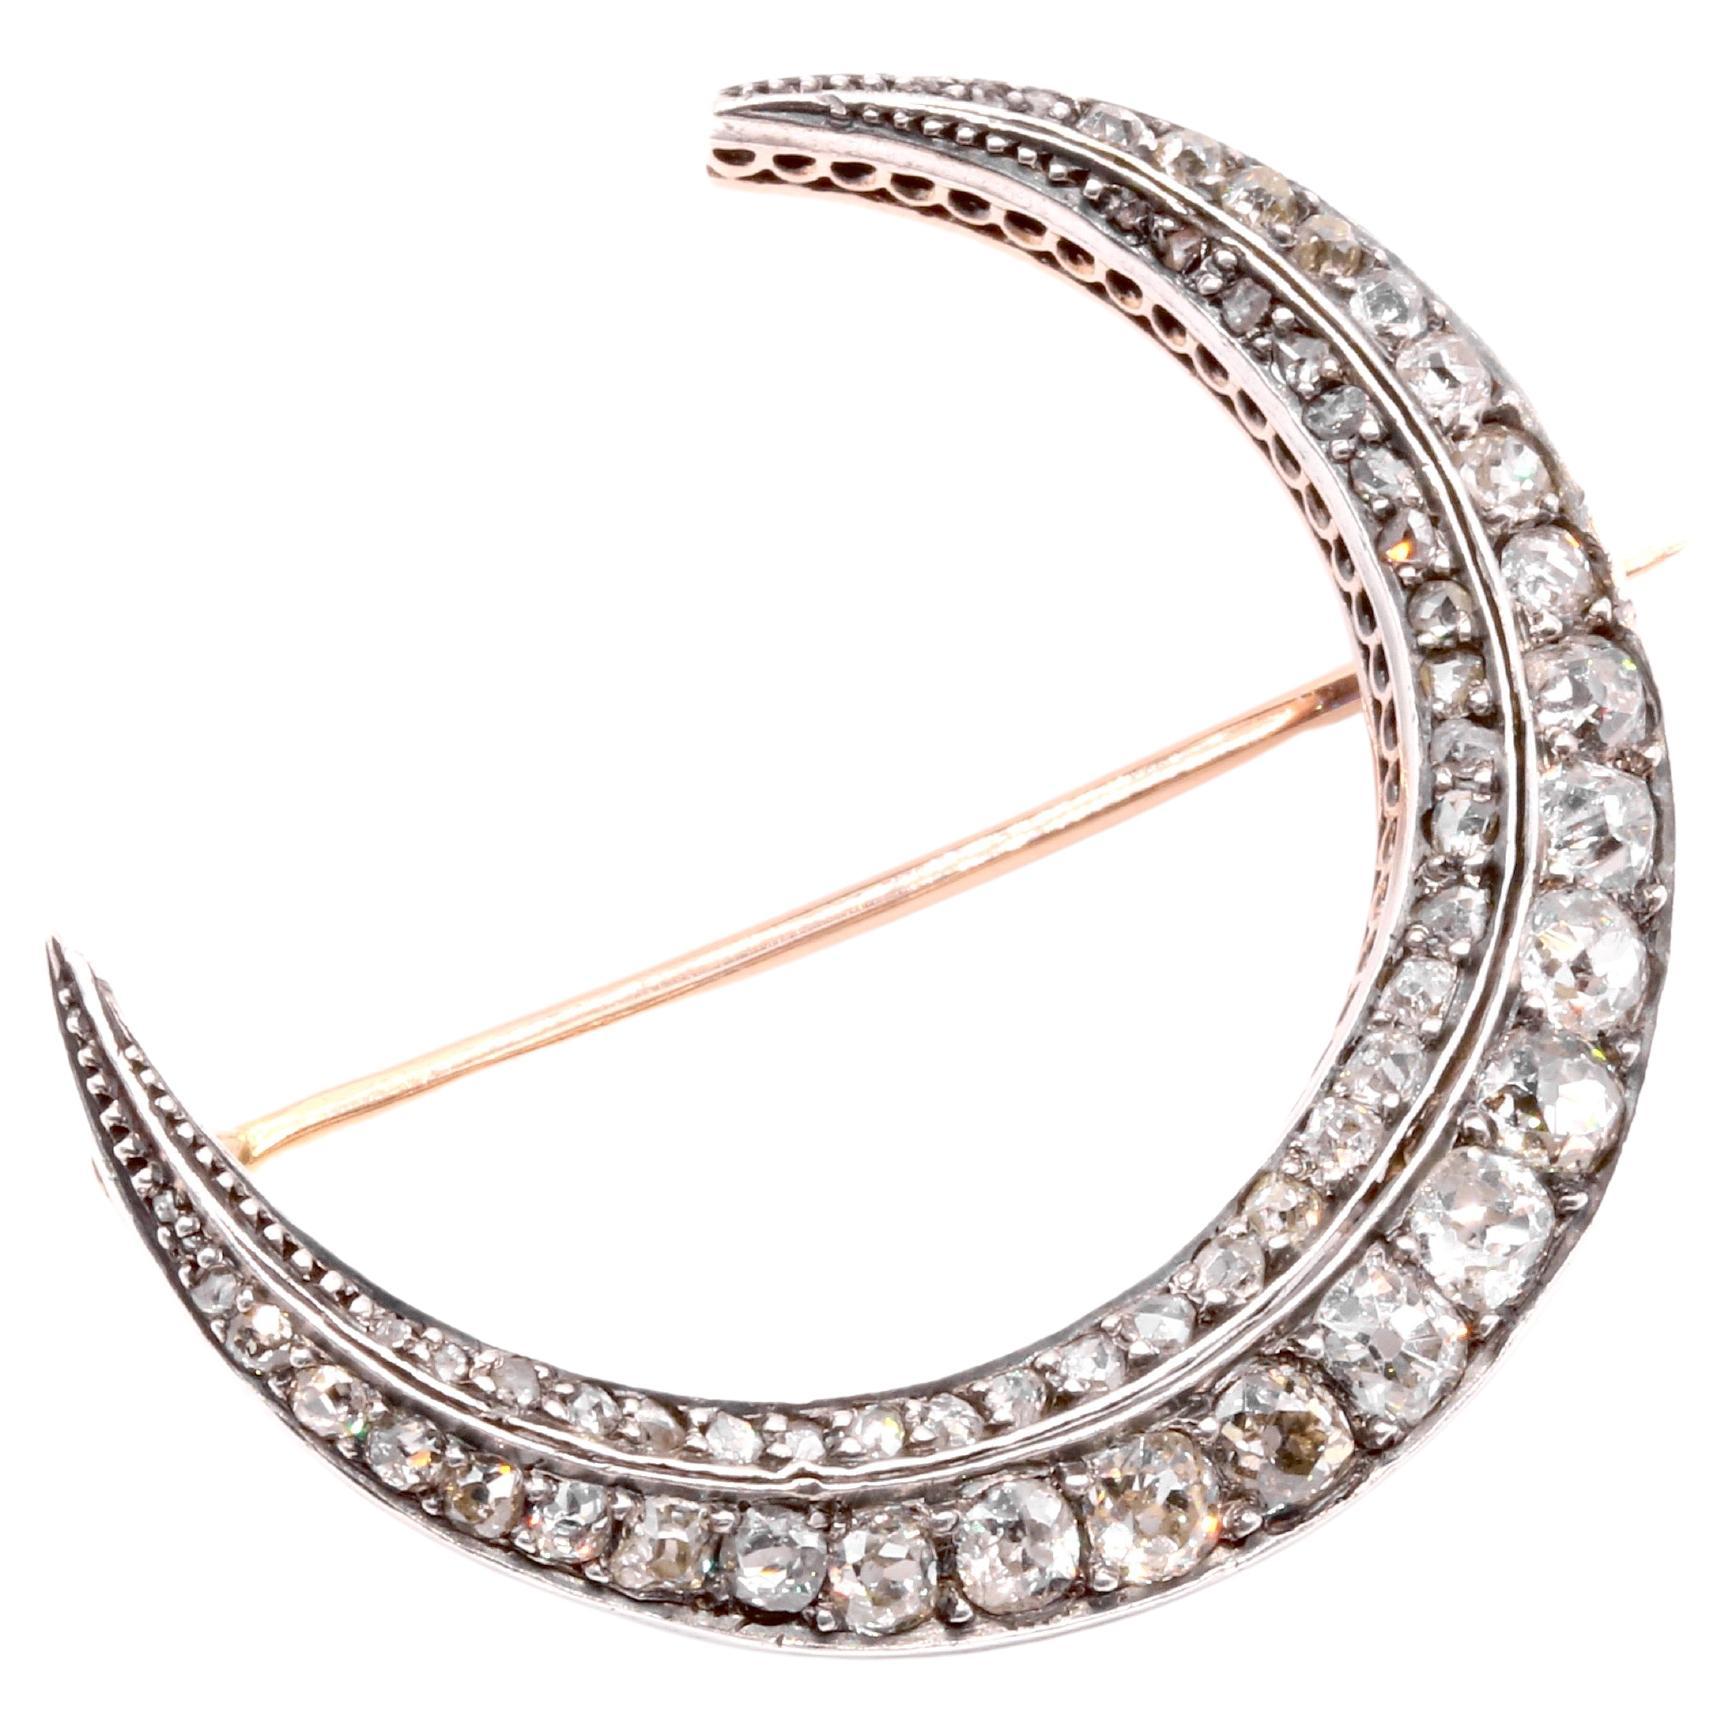 Antique Victorian 15K Gold & Silver 2.39ctw Diamond Crescent Brooch or Pendant For Sale